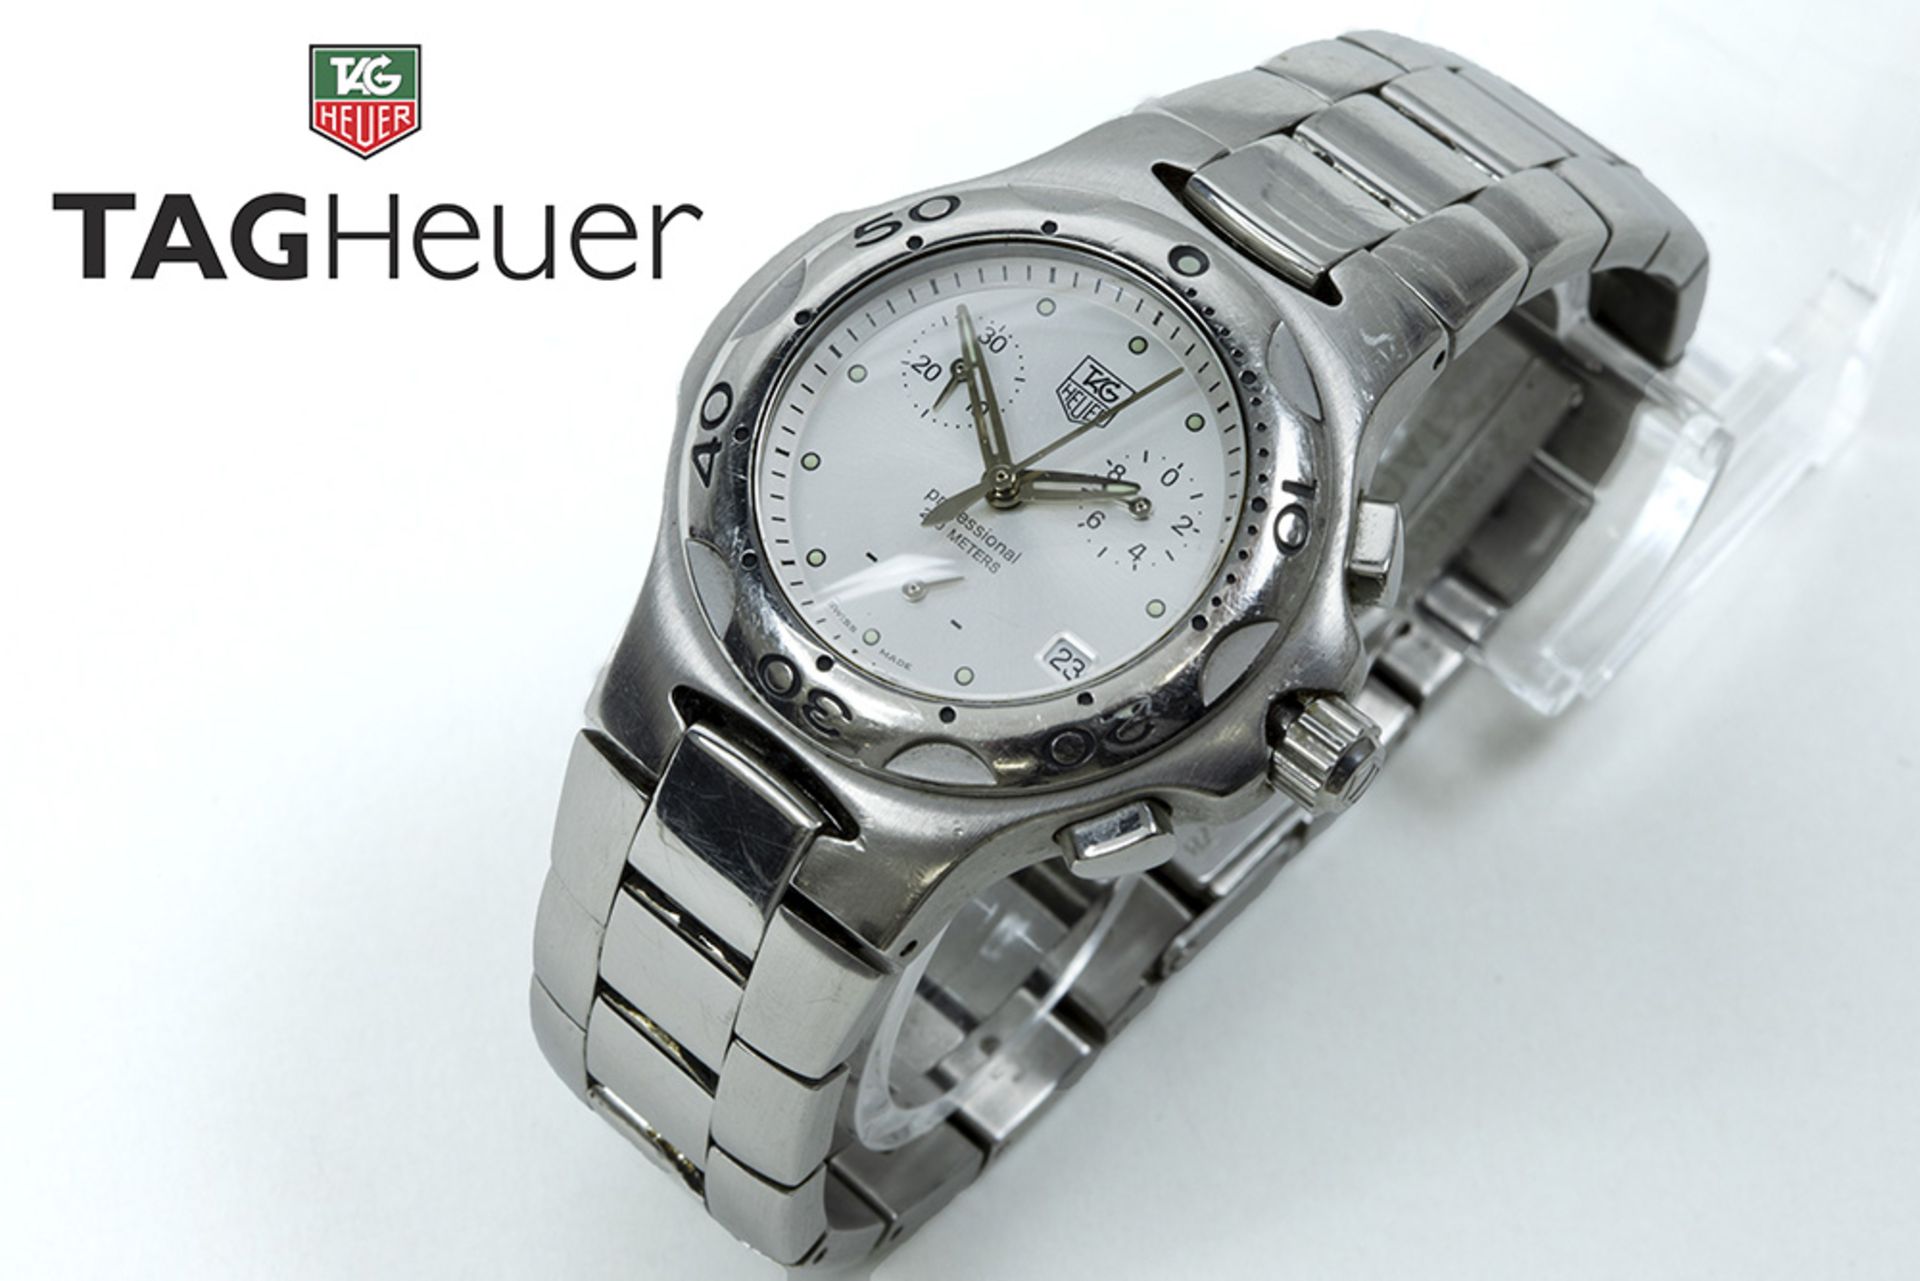 completely original quartz "Tag Heuer Kirium Chrono" wristwatch in steel - with its box marked ||